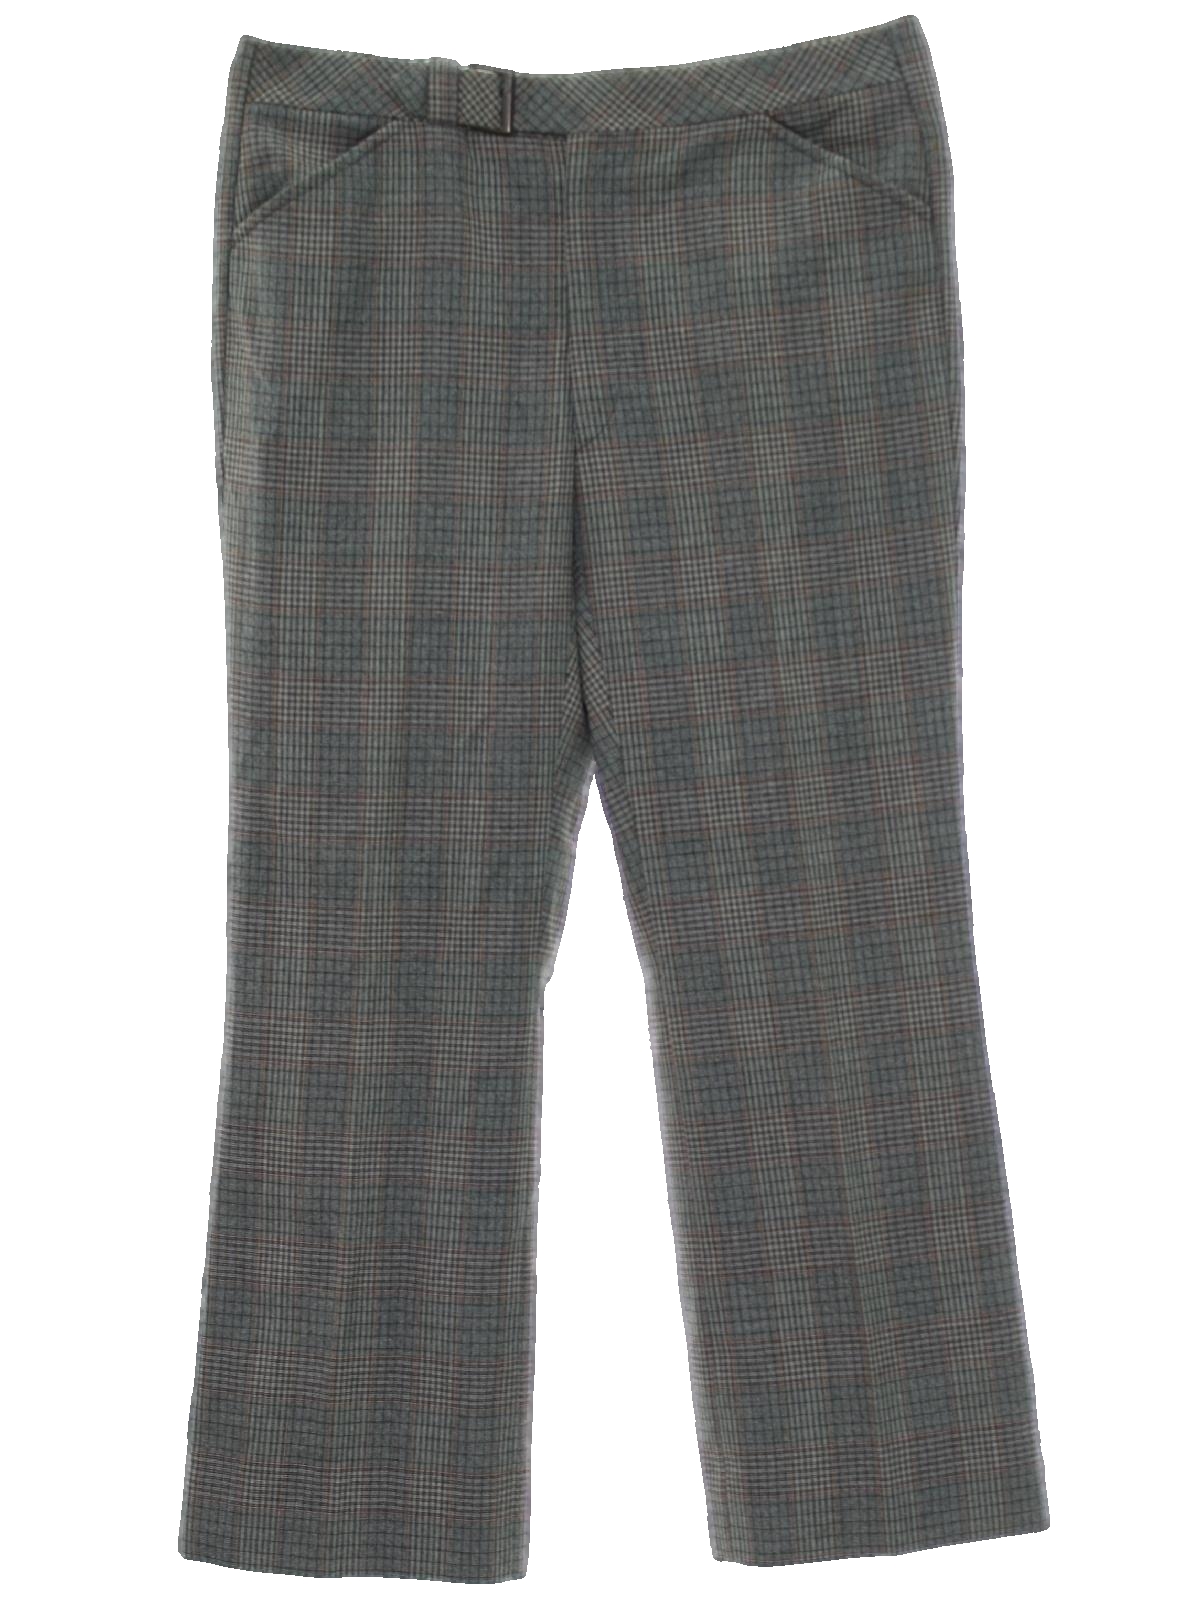 Seventies Vintage Flared Pants / Flares: 70s -No Label- Mens heather ...